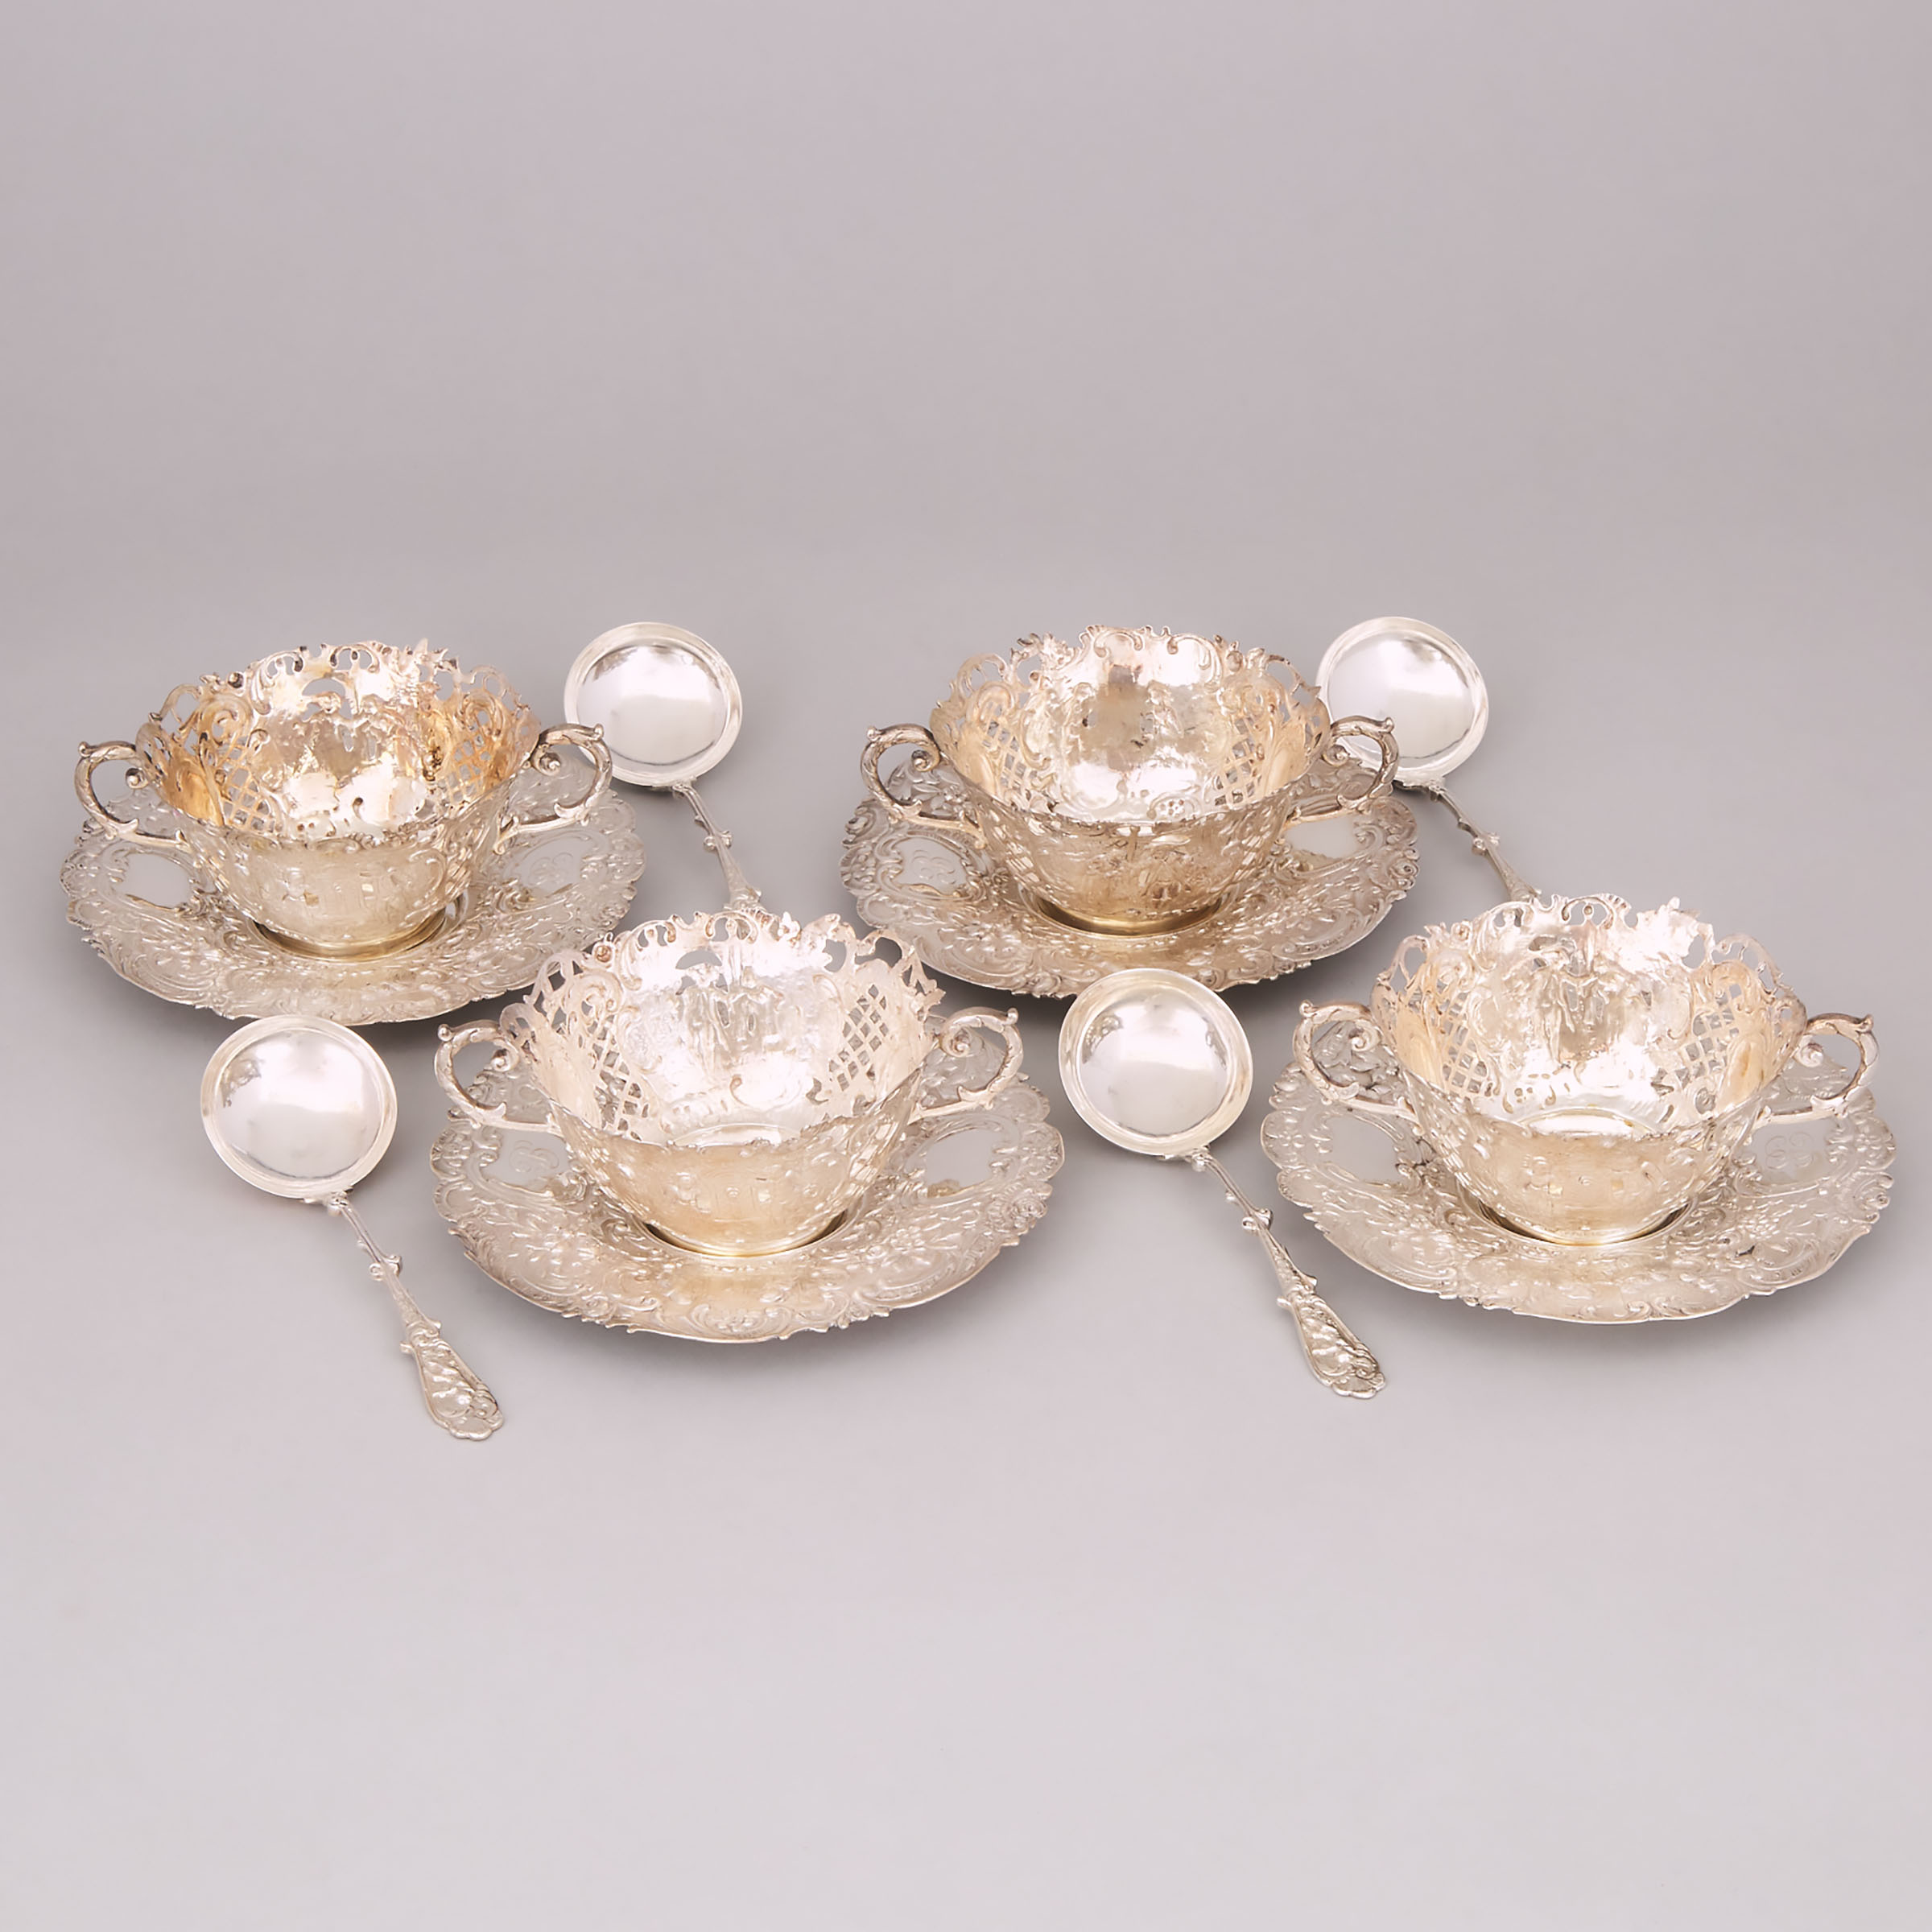 Four German Silver Soup Cups with Stands and Spoons, possibly Wolf & Knell, Hanau, early 20th century